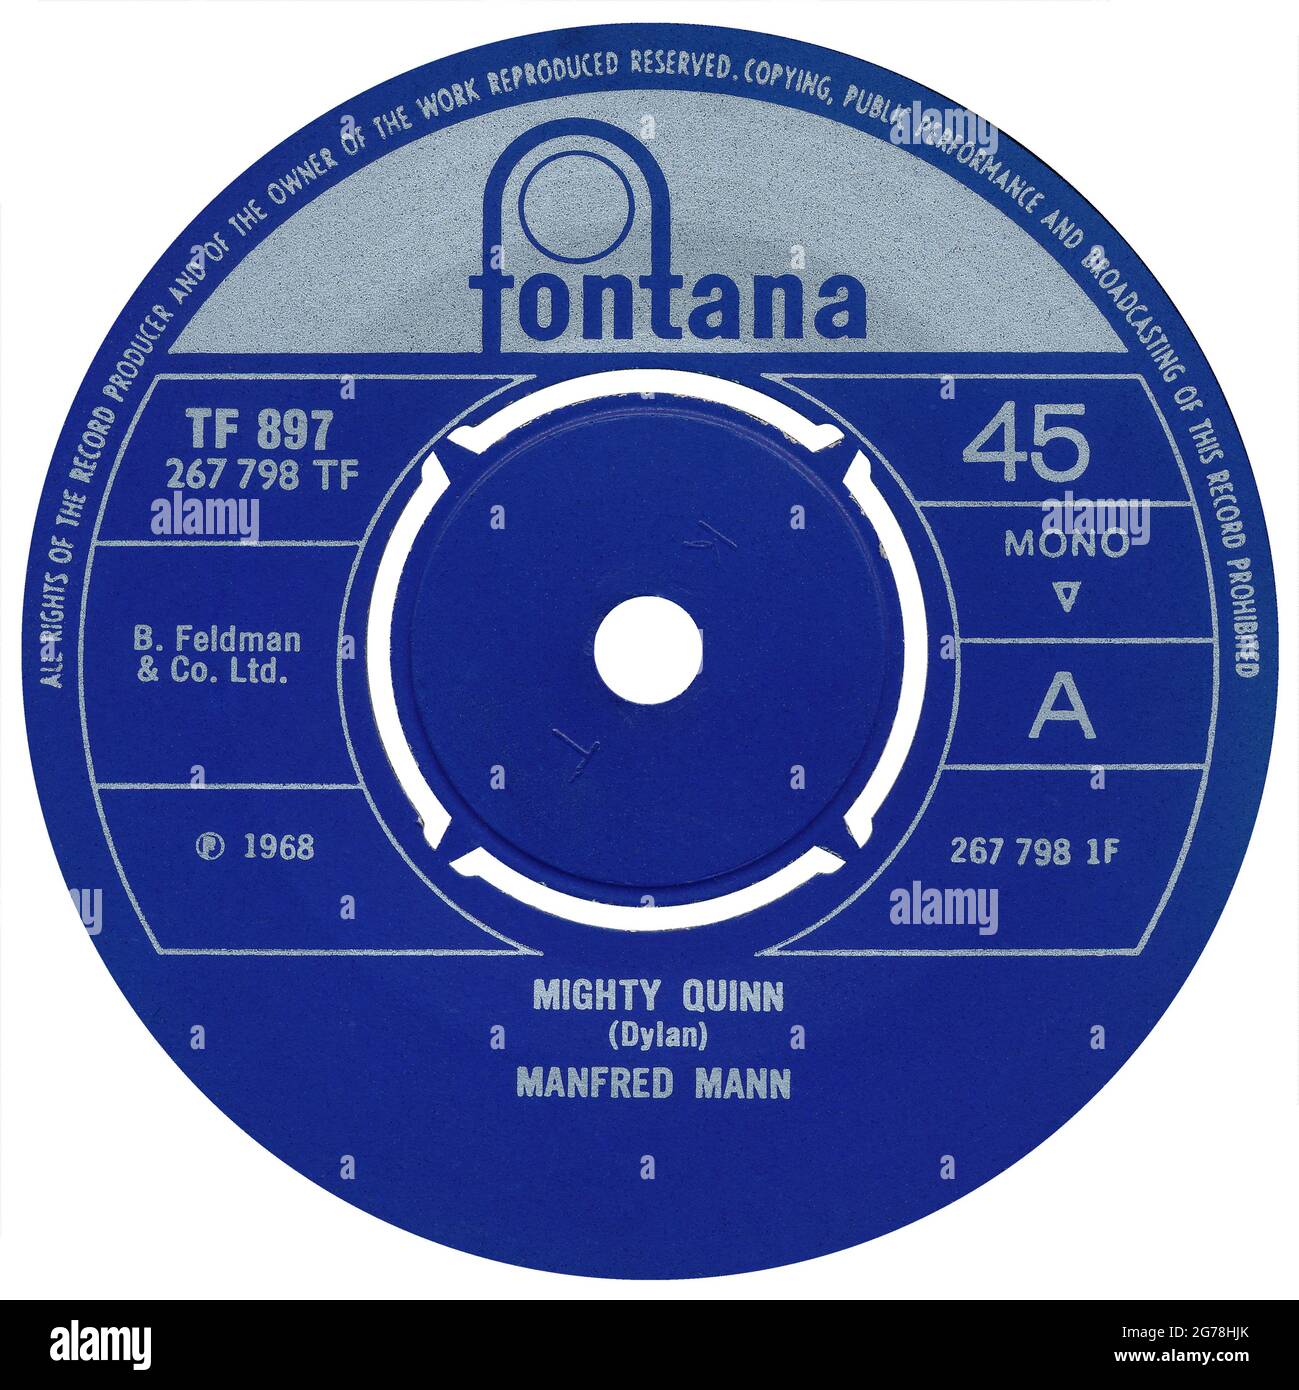 UK 45 rpm 7' single of Mighty Quinn by Manfred Mann on the Fontana label from 1968. Written by Bob Dylan and produced by Mike Hurst. Stock Photo